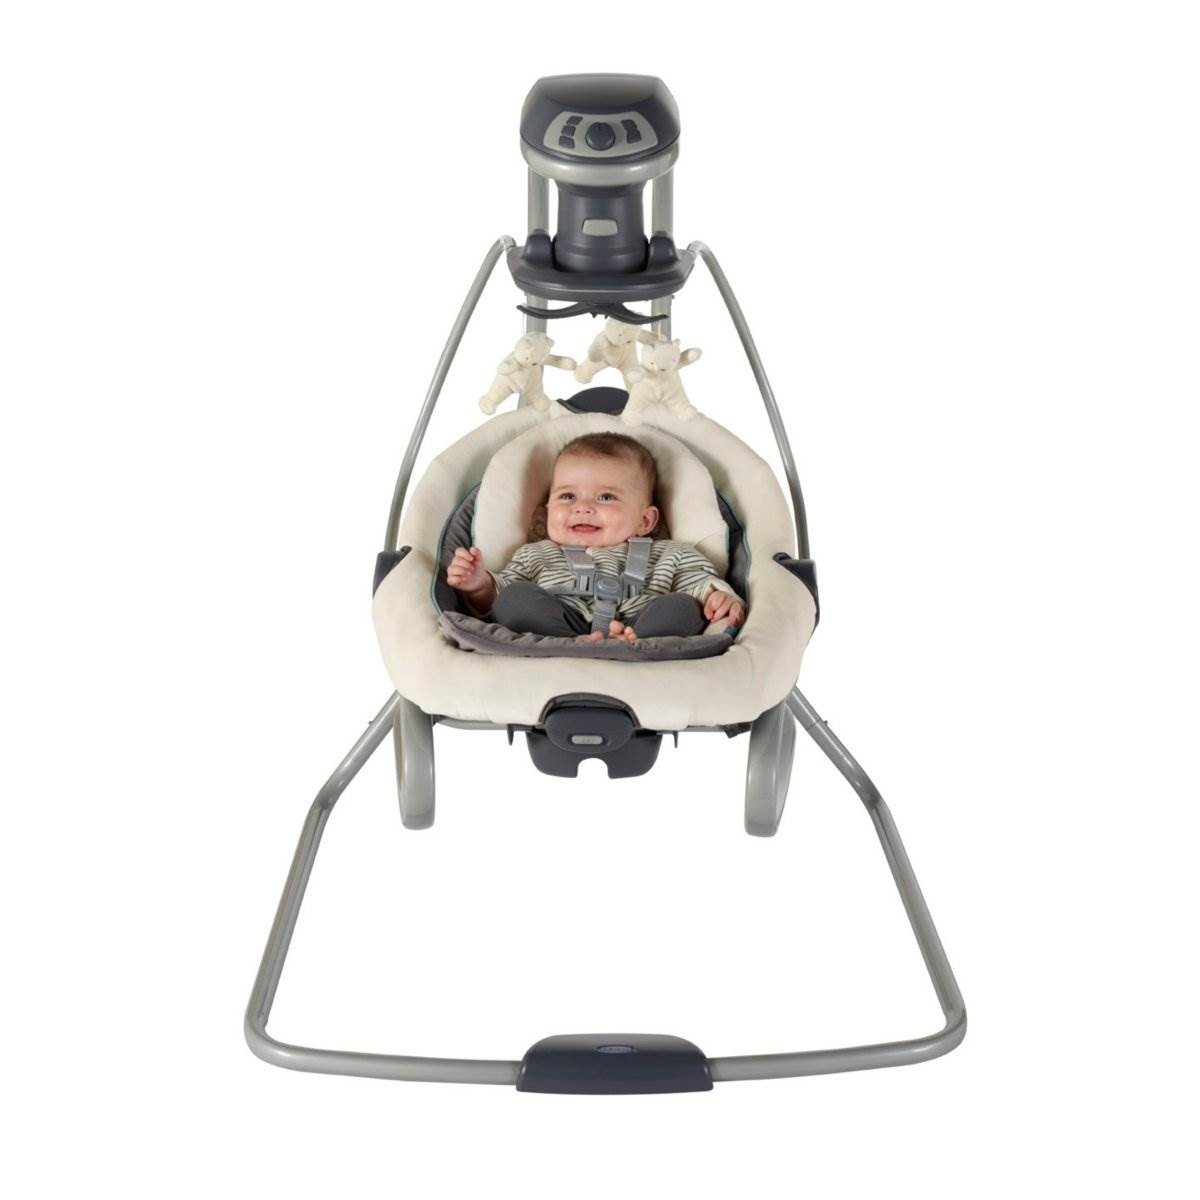 Graco DuetSoothe LX Infant Baby Swing and Rocker – Winslet | 1852655 - image 5 of 12